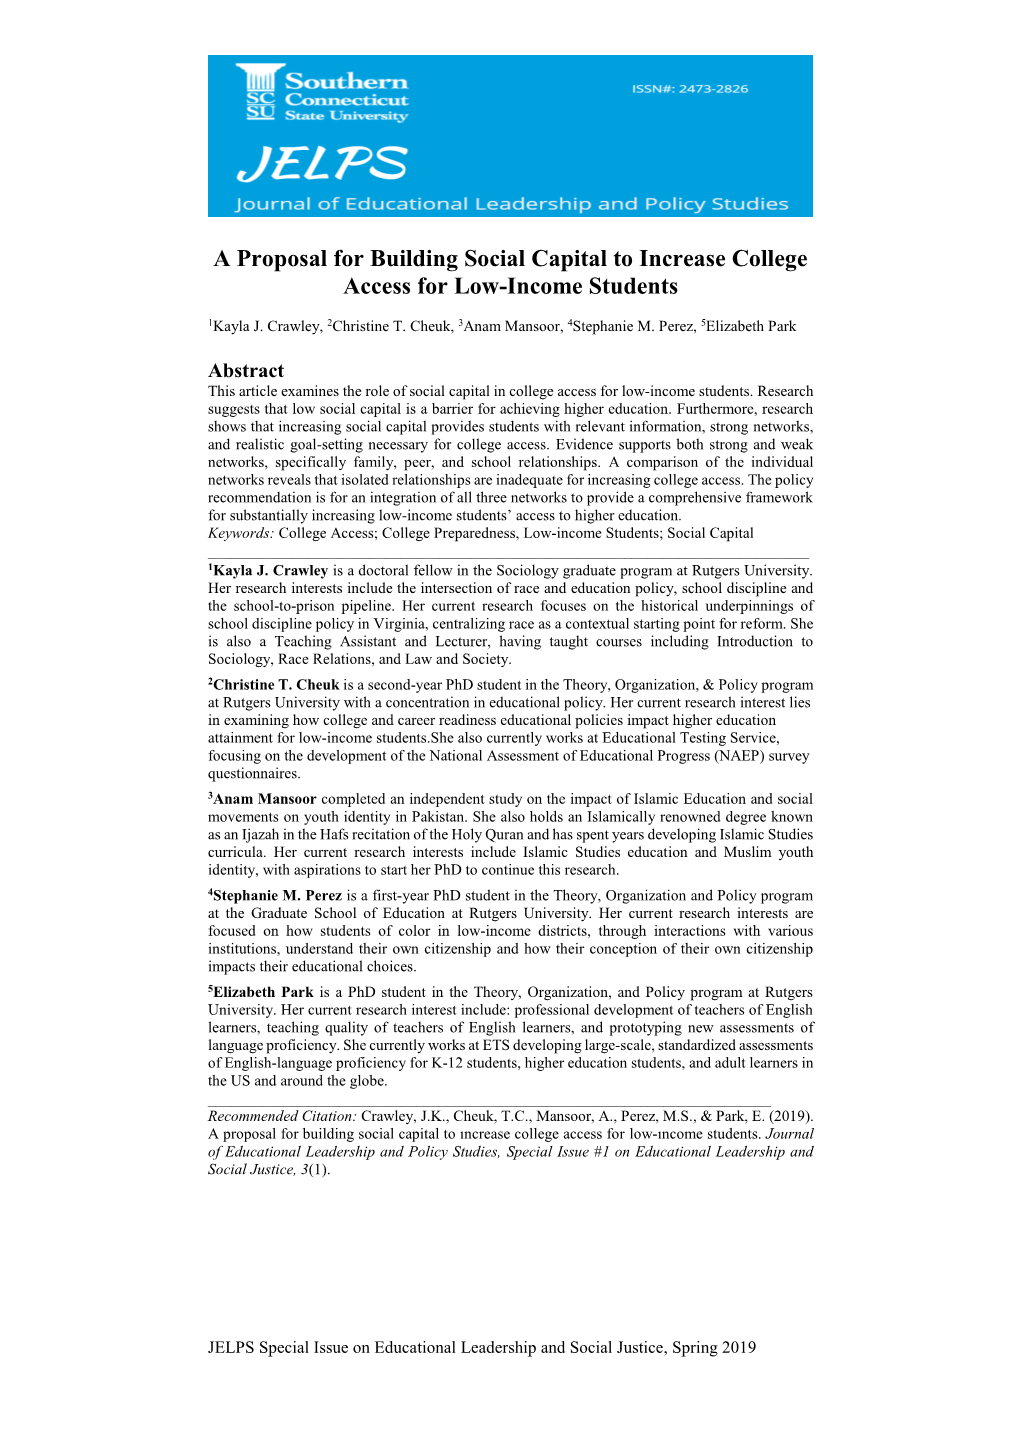 A Proposal for Building Social Capital to Increase College Access for Low-Income Students